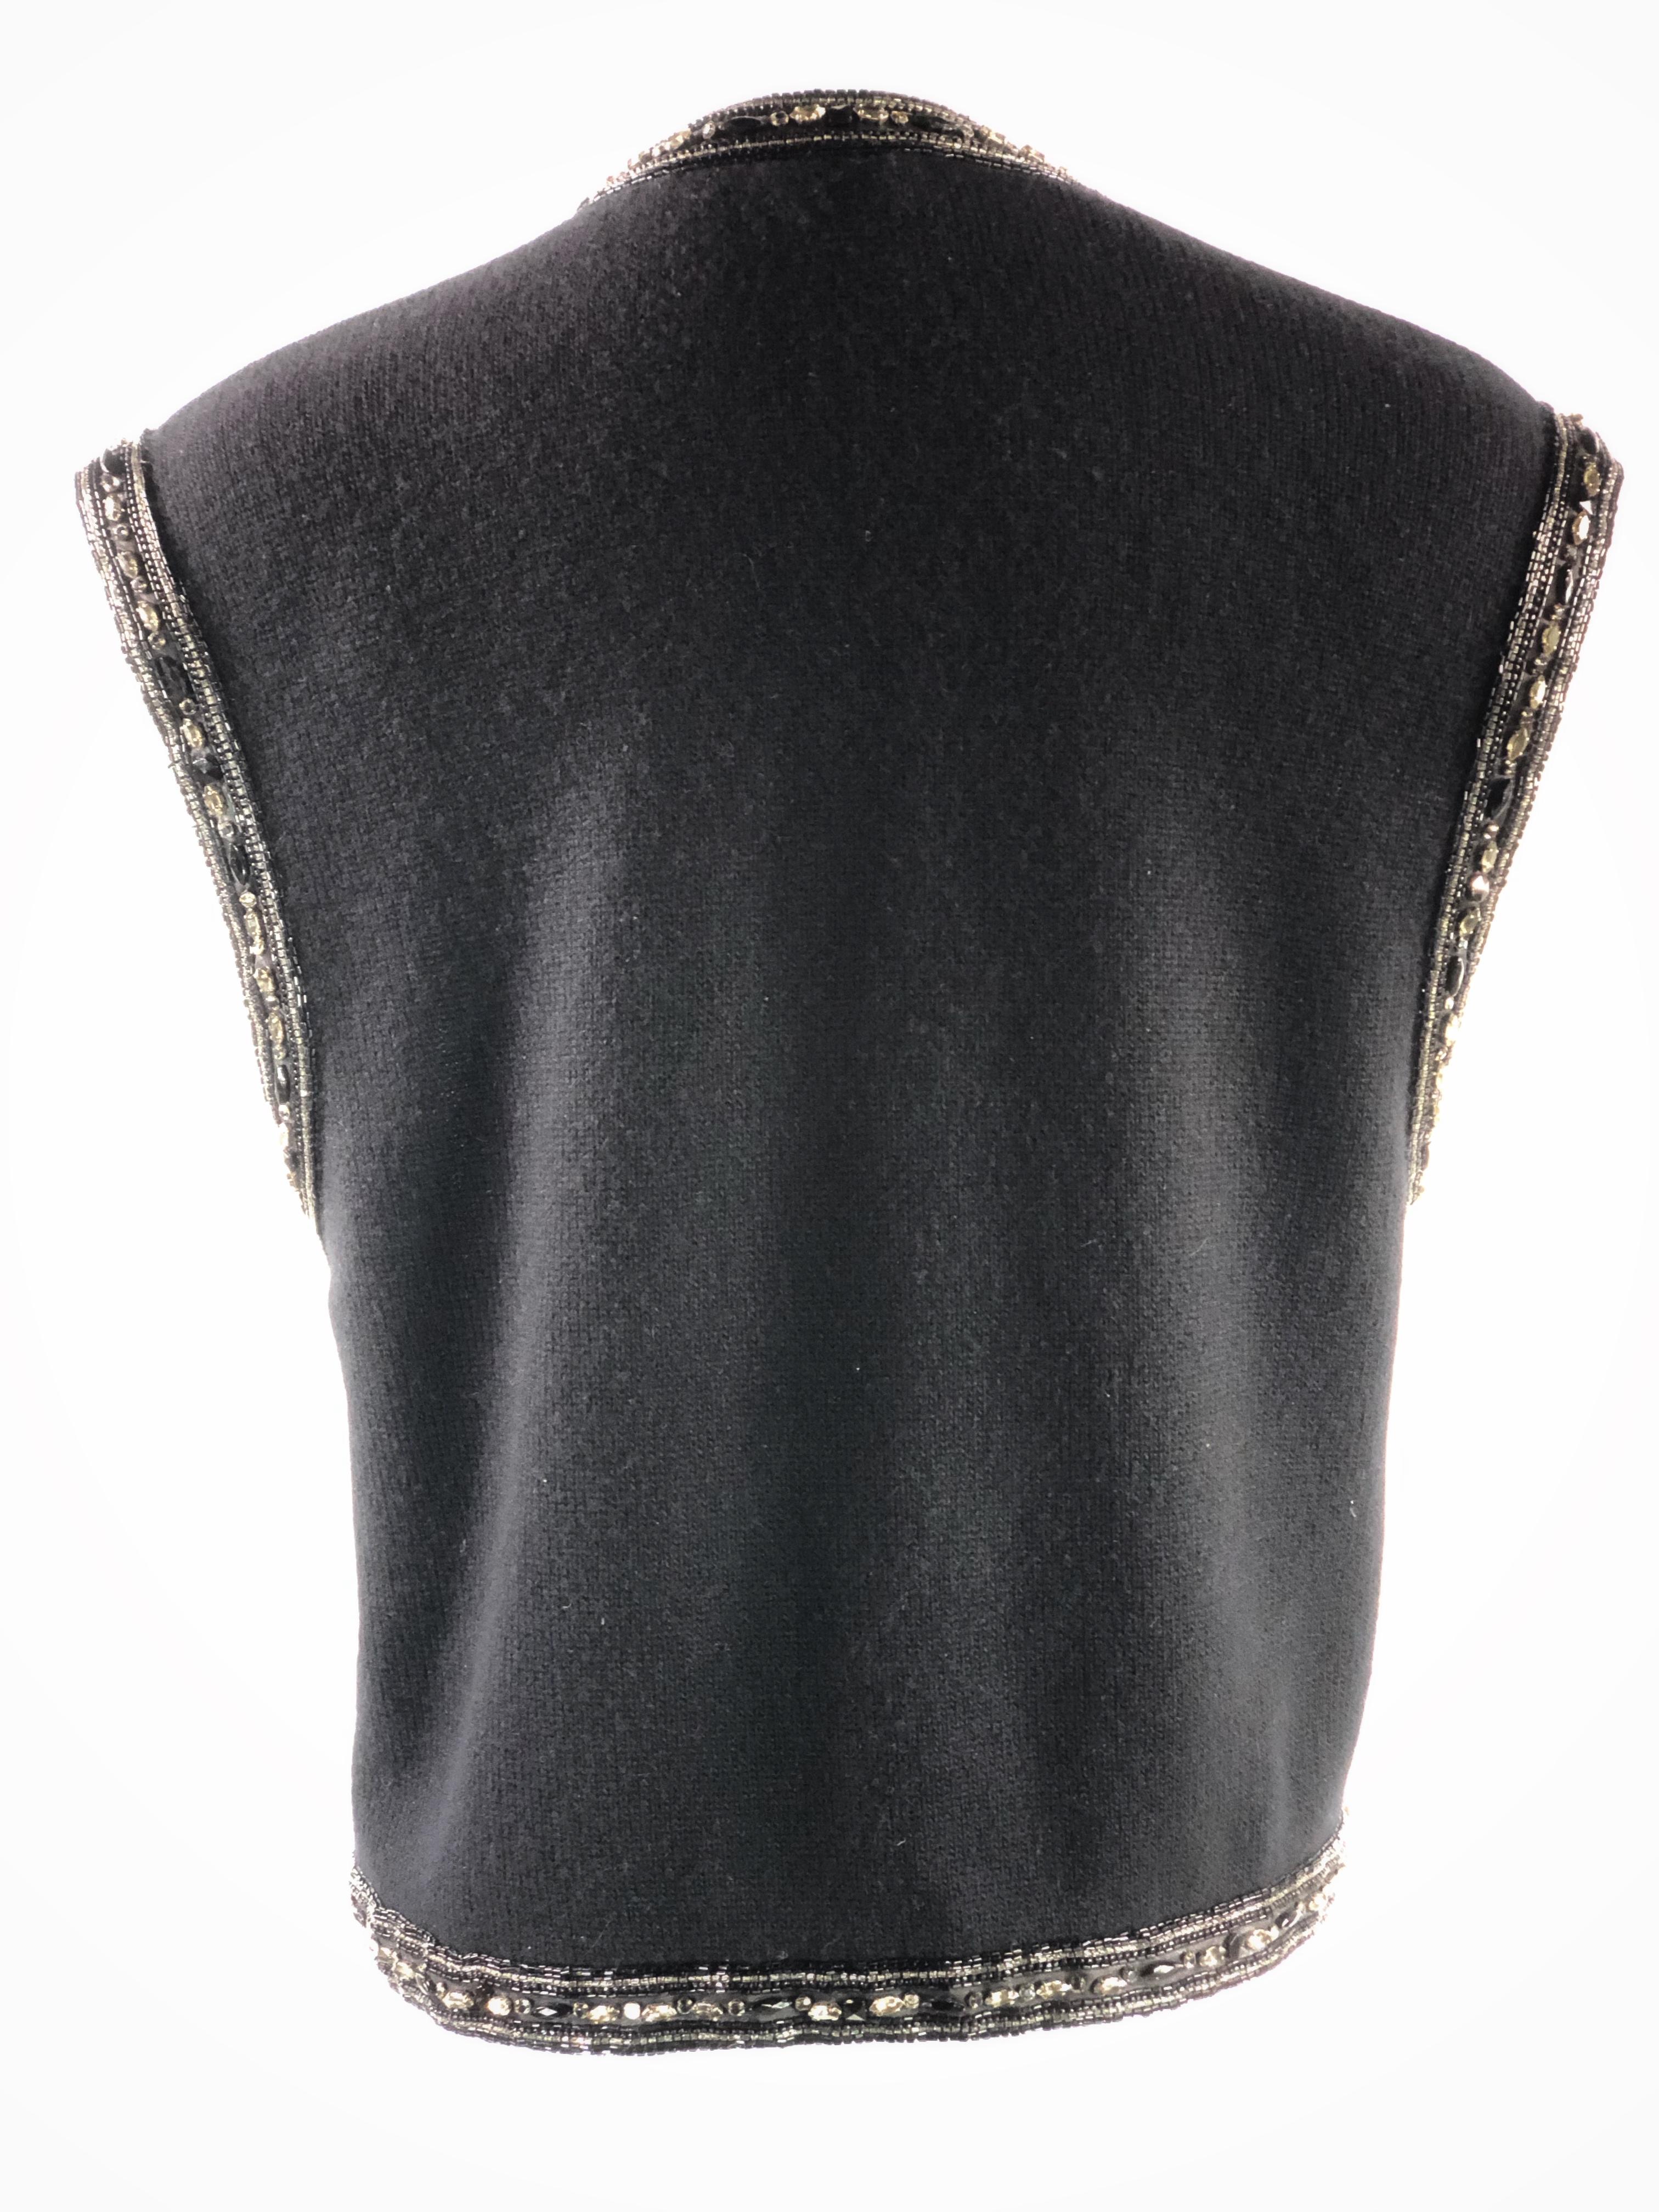 Vintage VALENTINO Night Black Knit Vest w/ Rhinestone Size M In Excellent Condition For Sale In Beverly Hills, CA